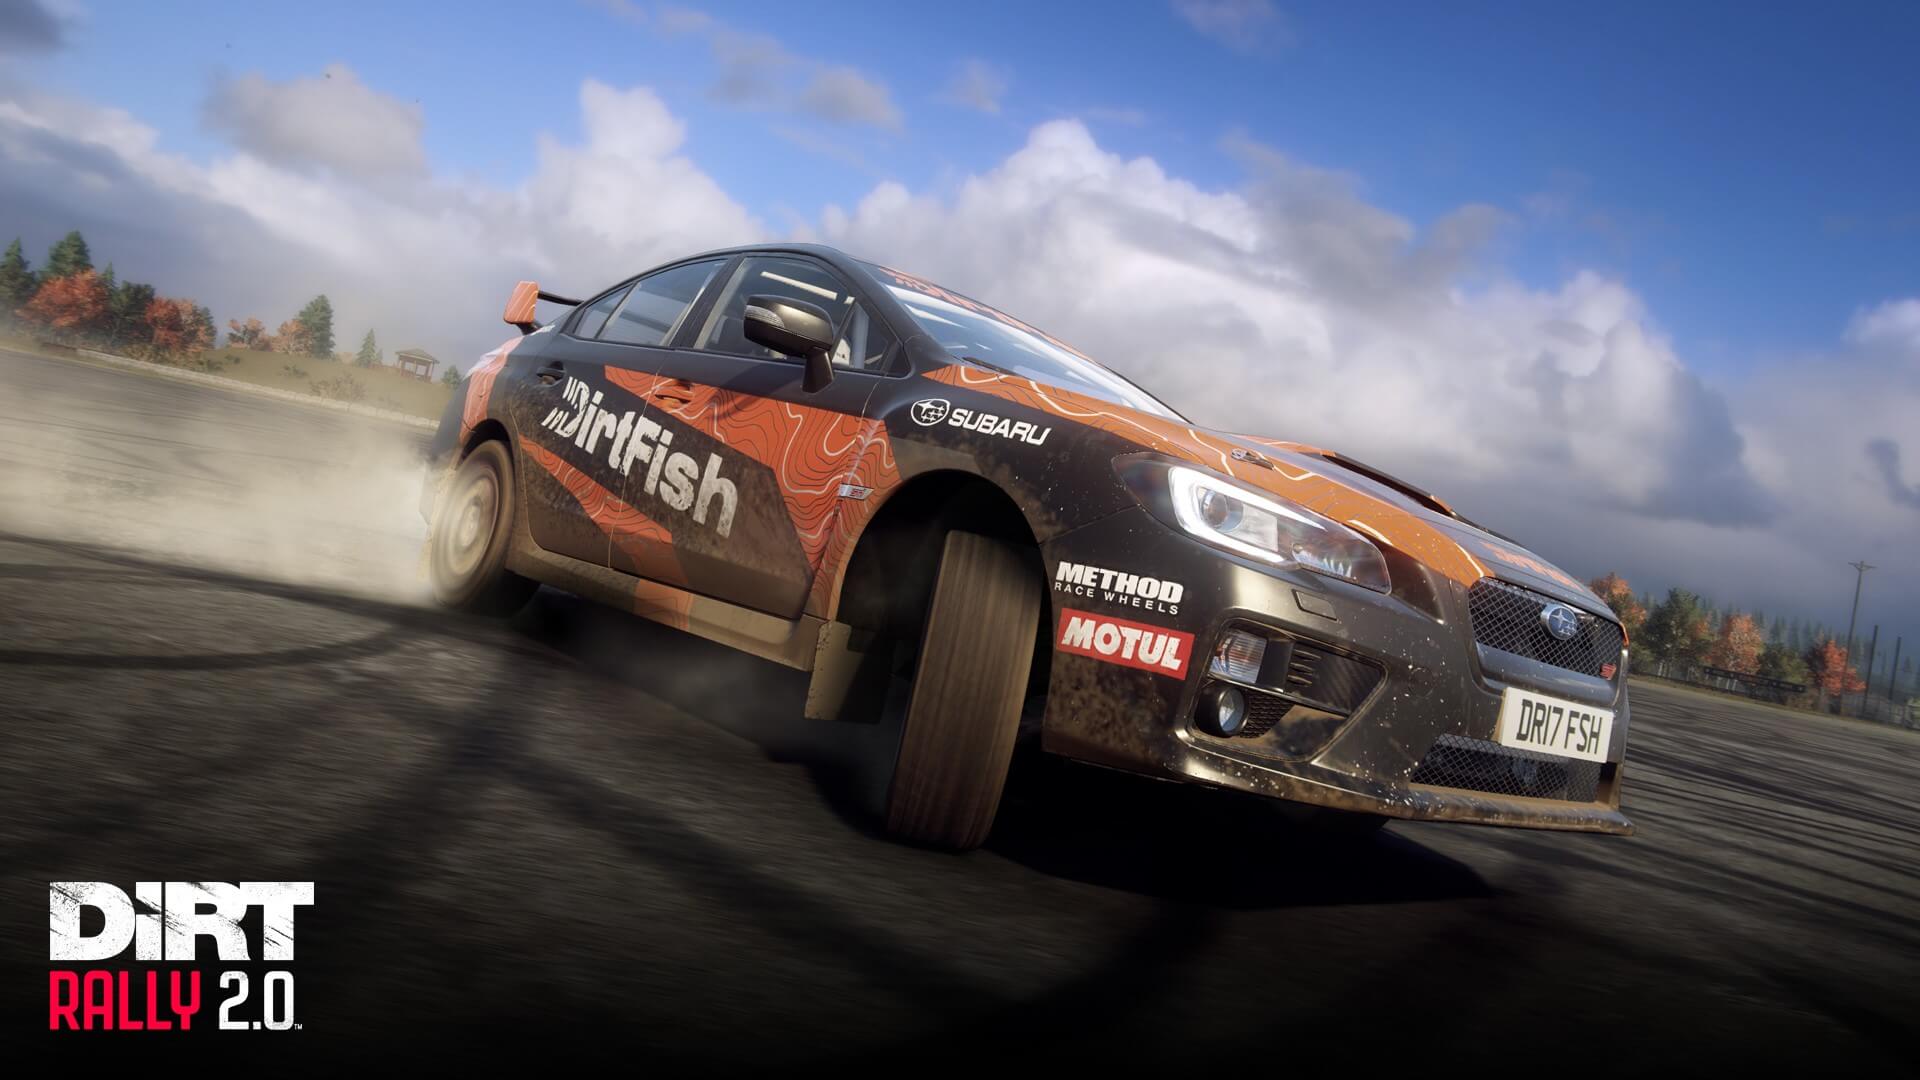 DiRT Rally 2.0 Version 1.7 Now Available: VR Support, DirtFish and More –  GTPlanet